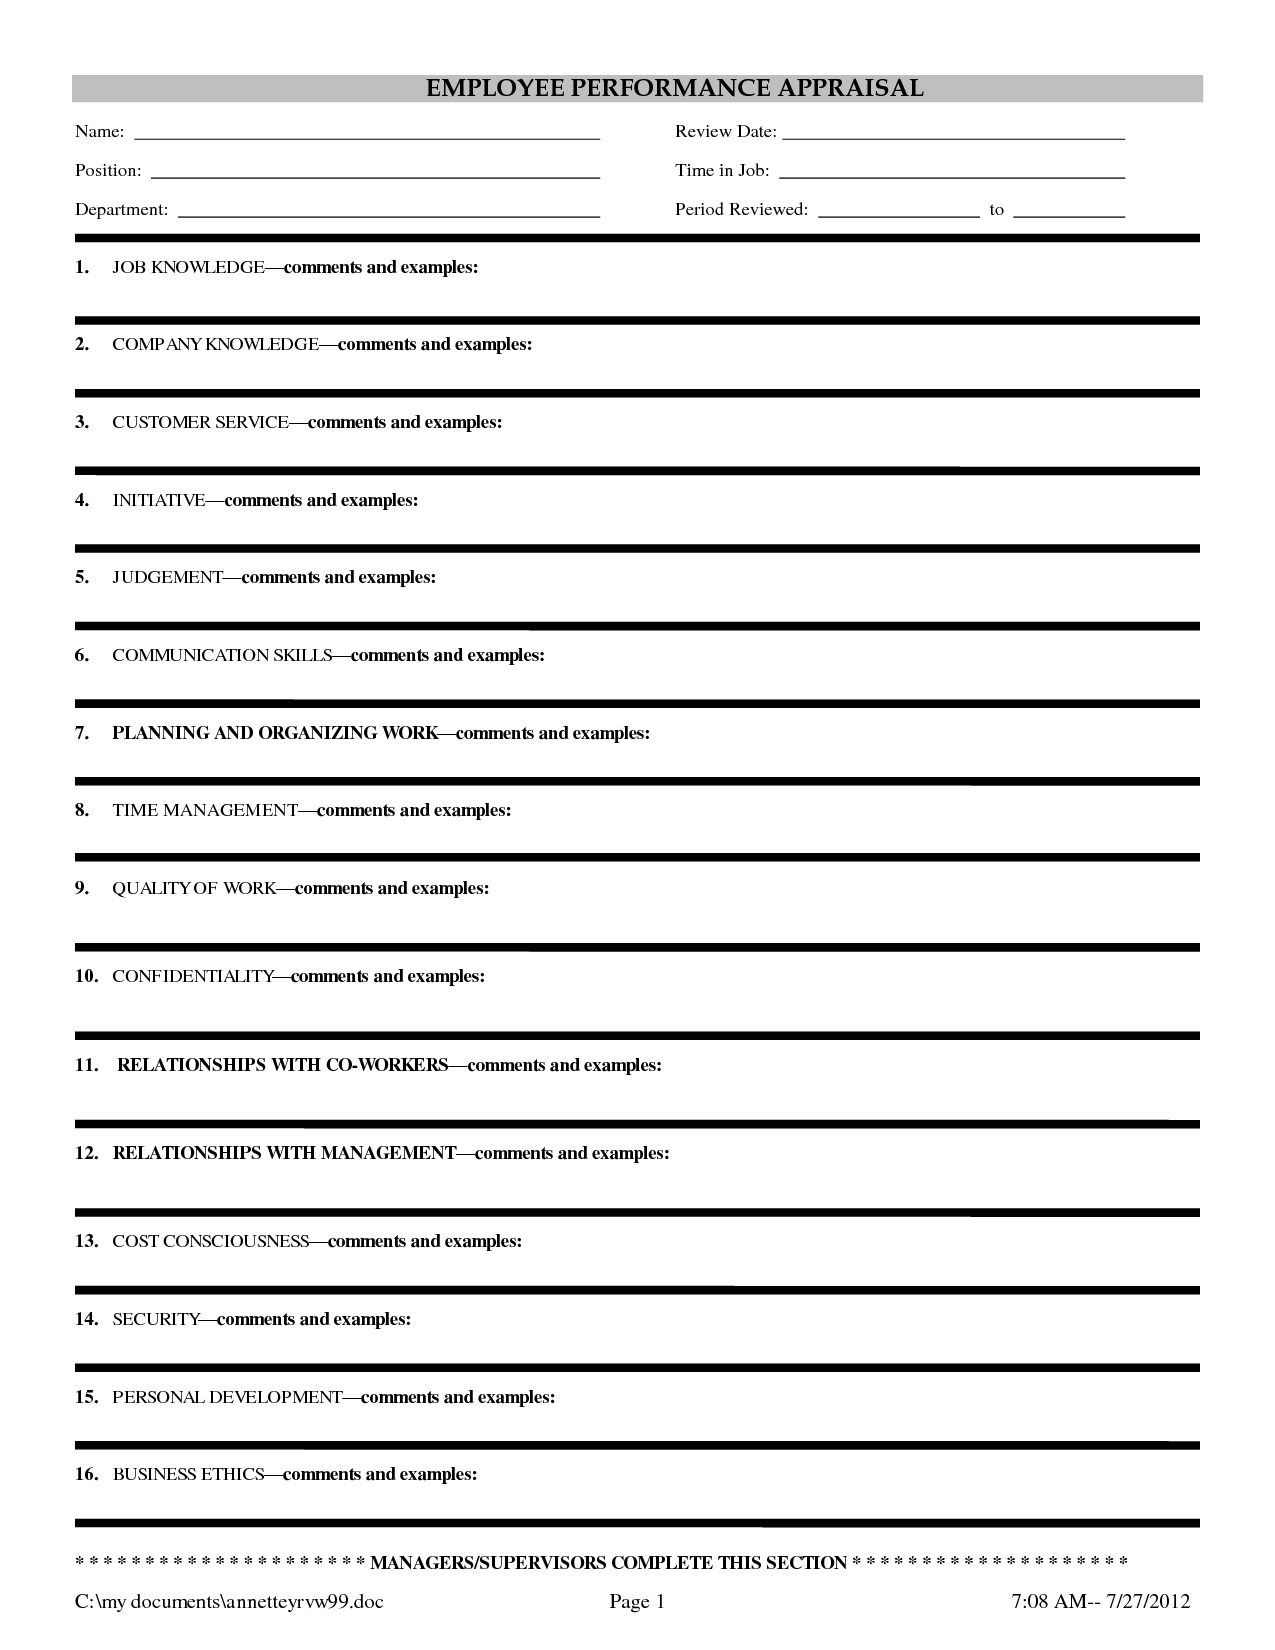 23 Images Of Evaluation Outline Template Blank | Masorler In Blank Evaluation Form Template